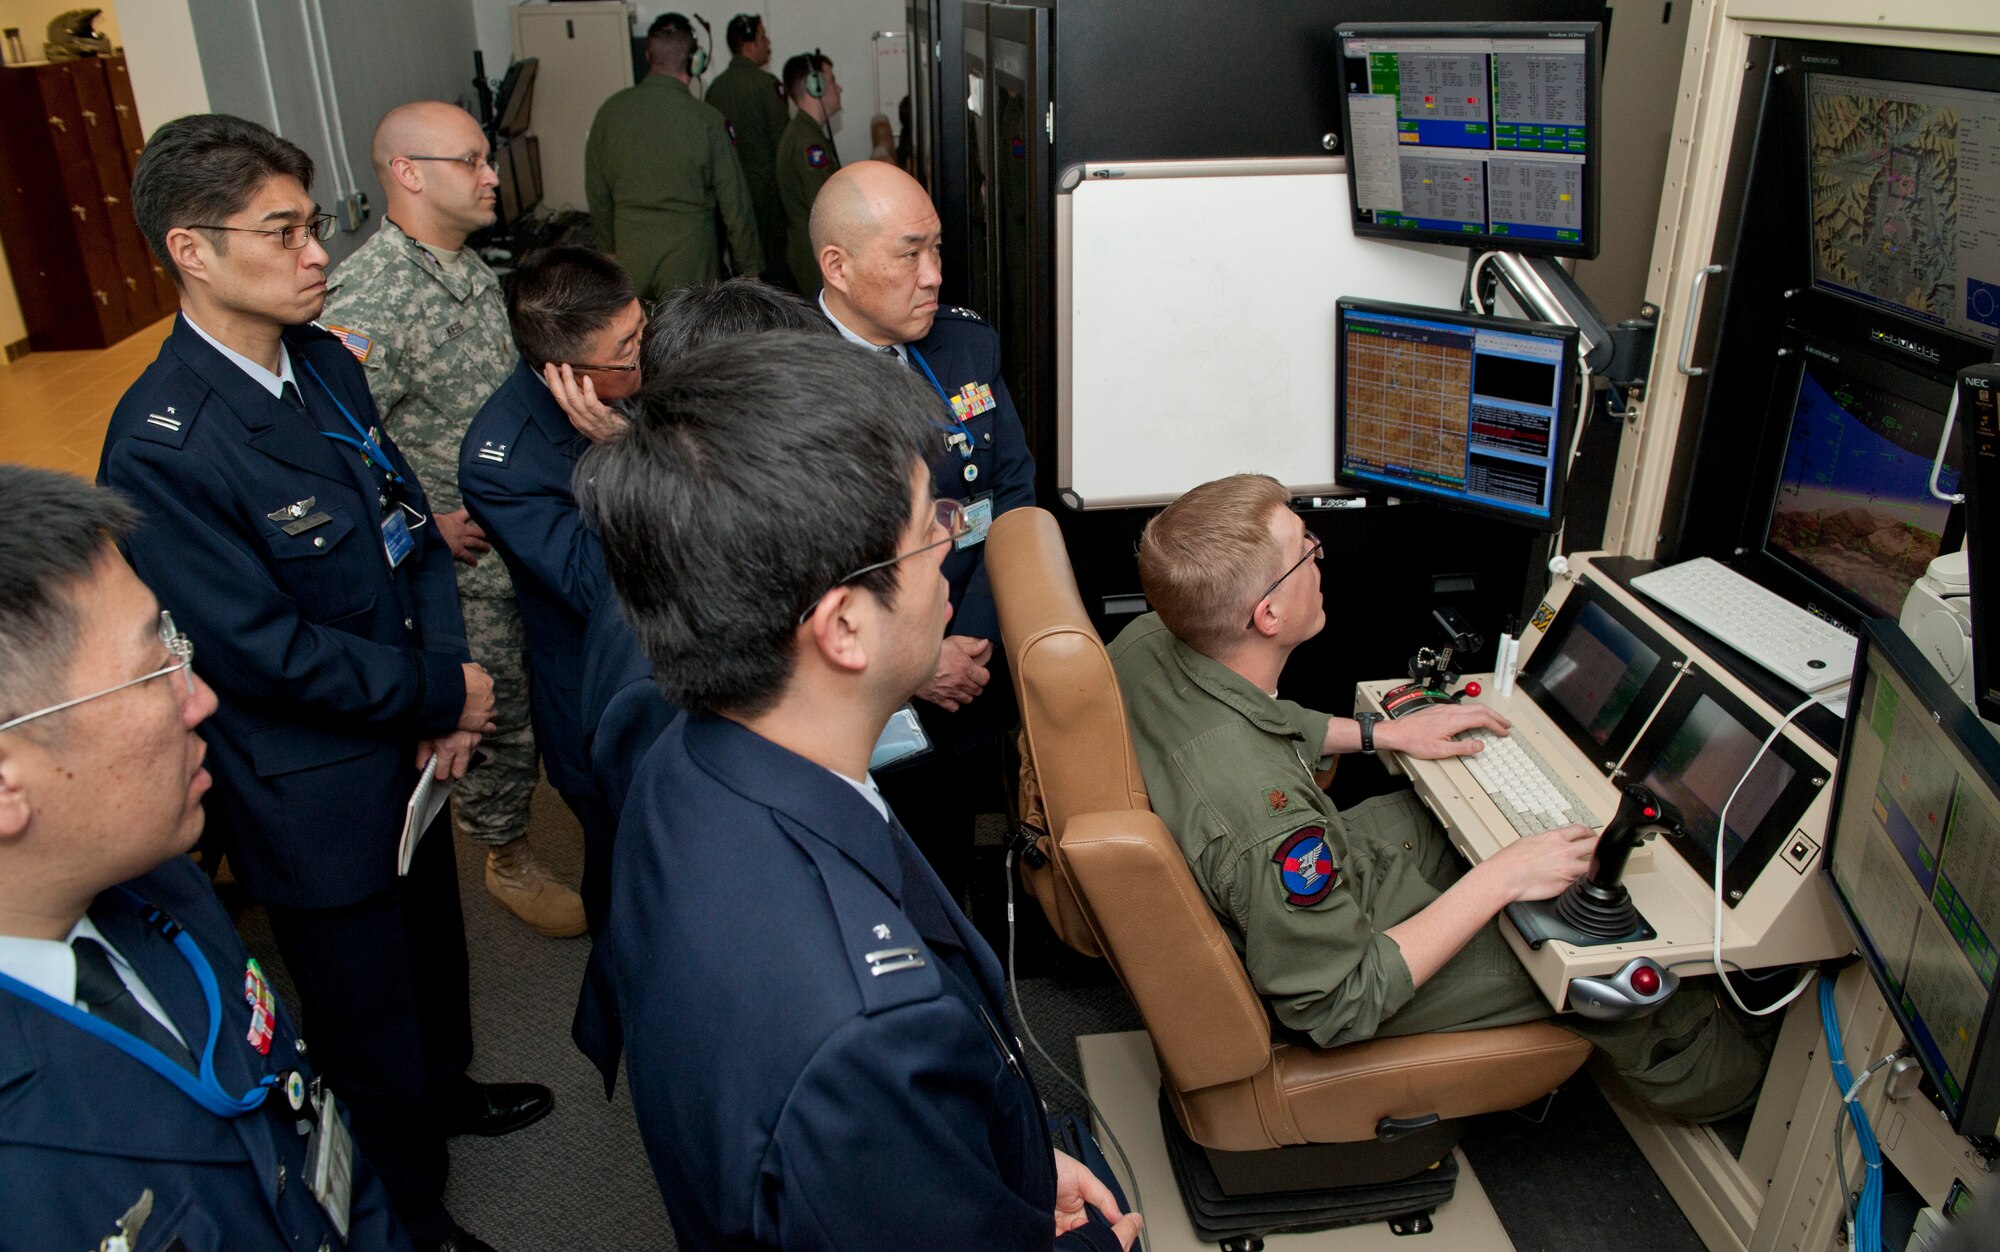 Major Michael [last name withheld due to operations security constraints], 9th Attack Squadron, flight commander, demonstrates flying an MQ-9 Reaper in a flight simulator to members of the Japan Air Self Defense Force at Holloman Air Force Base, N.M., March 19. The Remotely Piloted Aircraft program was briefed to the members of the Japan Air Self Defense Force. Their visit to Holloman AFB was part of an effort to bolster Japanese intelligence, surveillance and reconnaissance capability. (U.S. Air Force photo by Airman 1st Class Colin Cates/Released) 